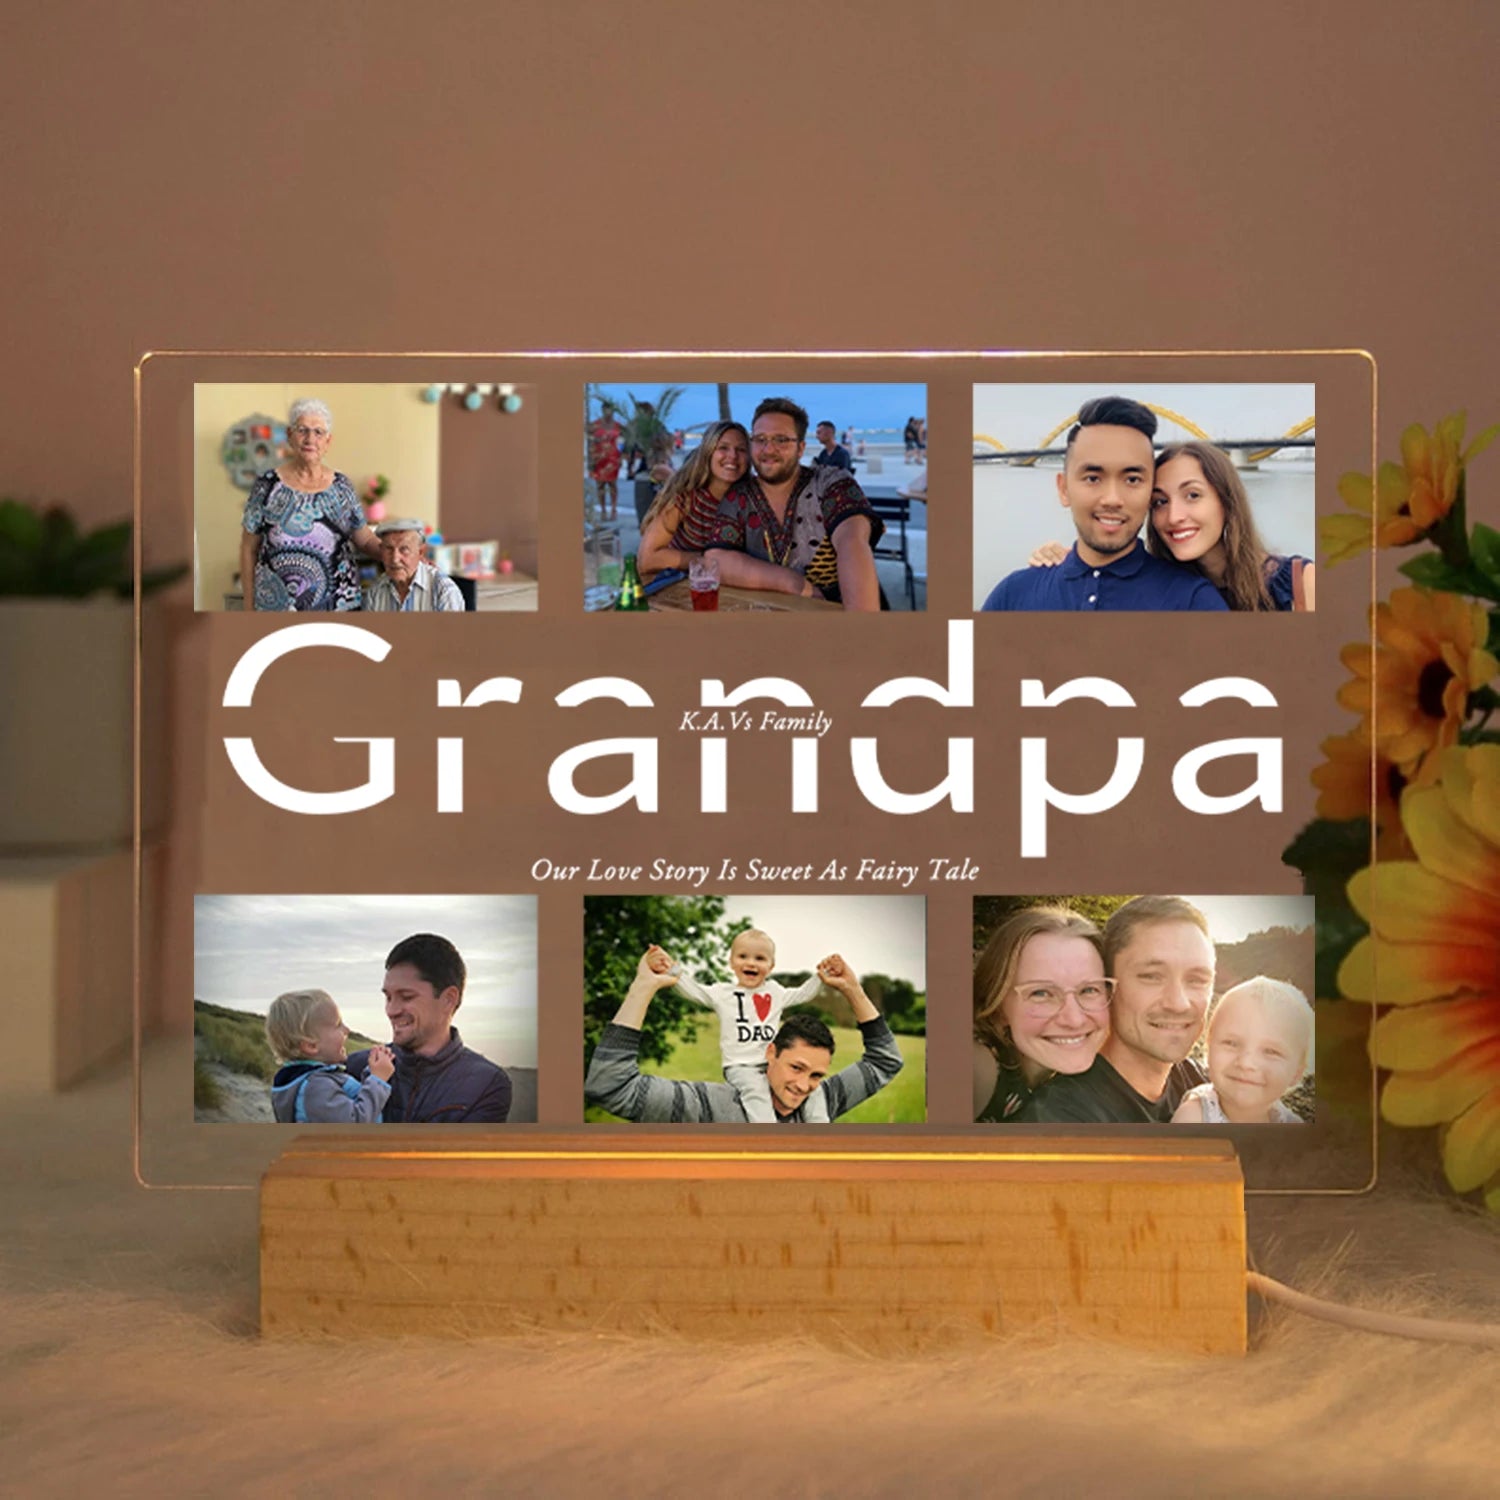 Personalized Acrylic Lamp with Custom Photo and Text - Ideal Bedroom Night Light for MOM DAD LOVE Friend Family Day Wedding Birthday Gift Present Grandpa / Warm Light